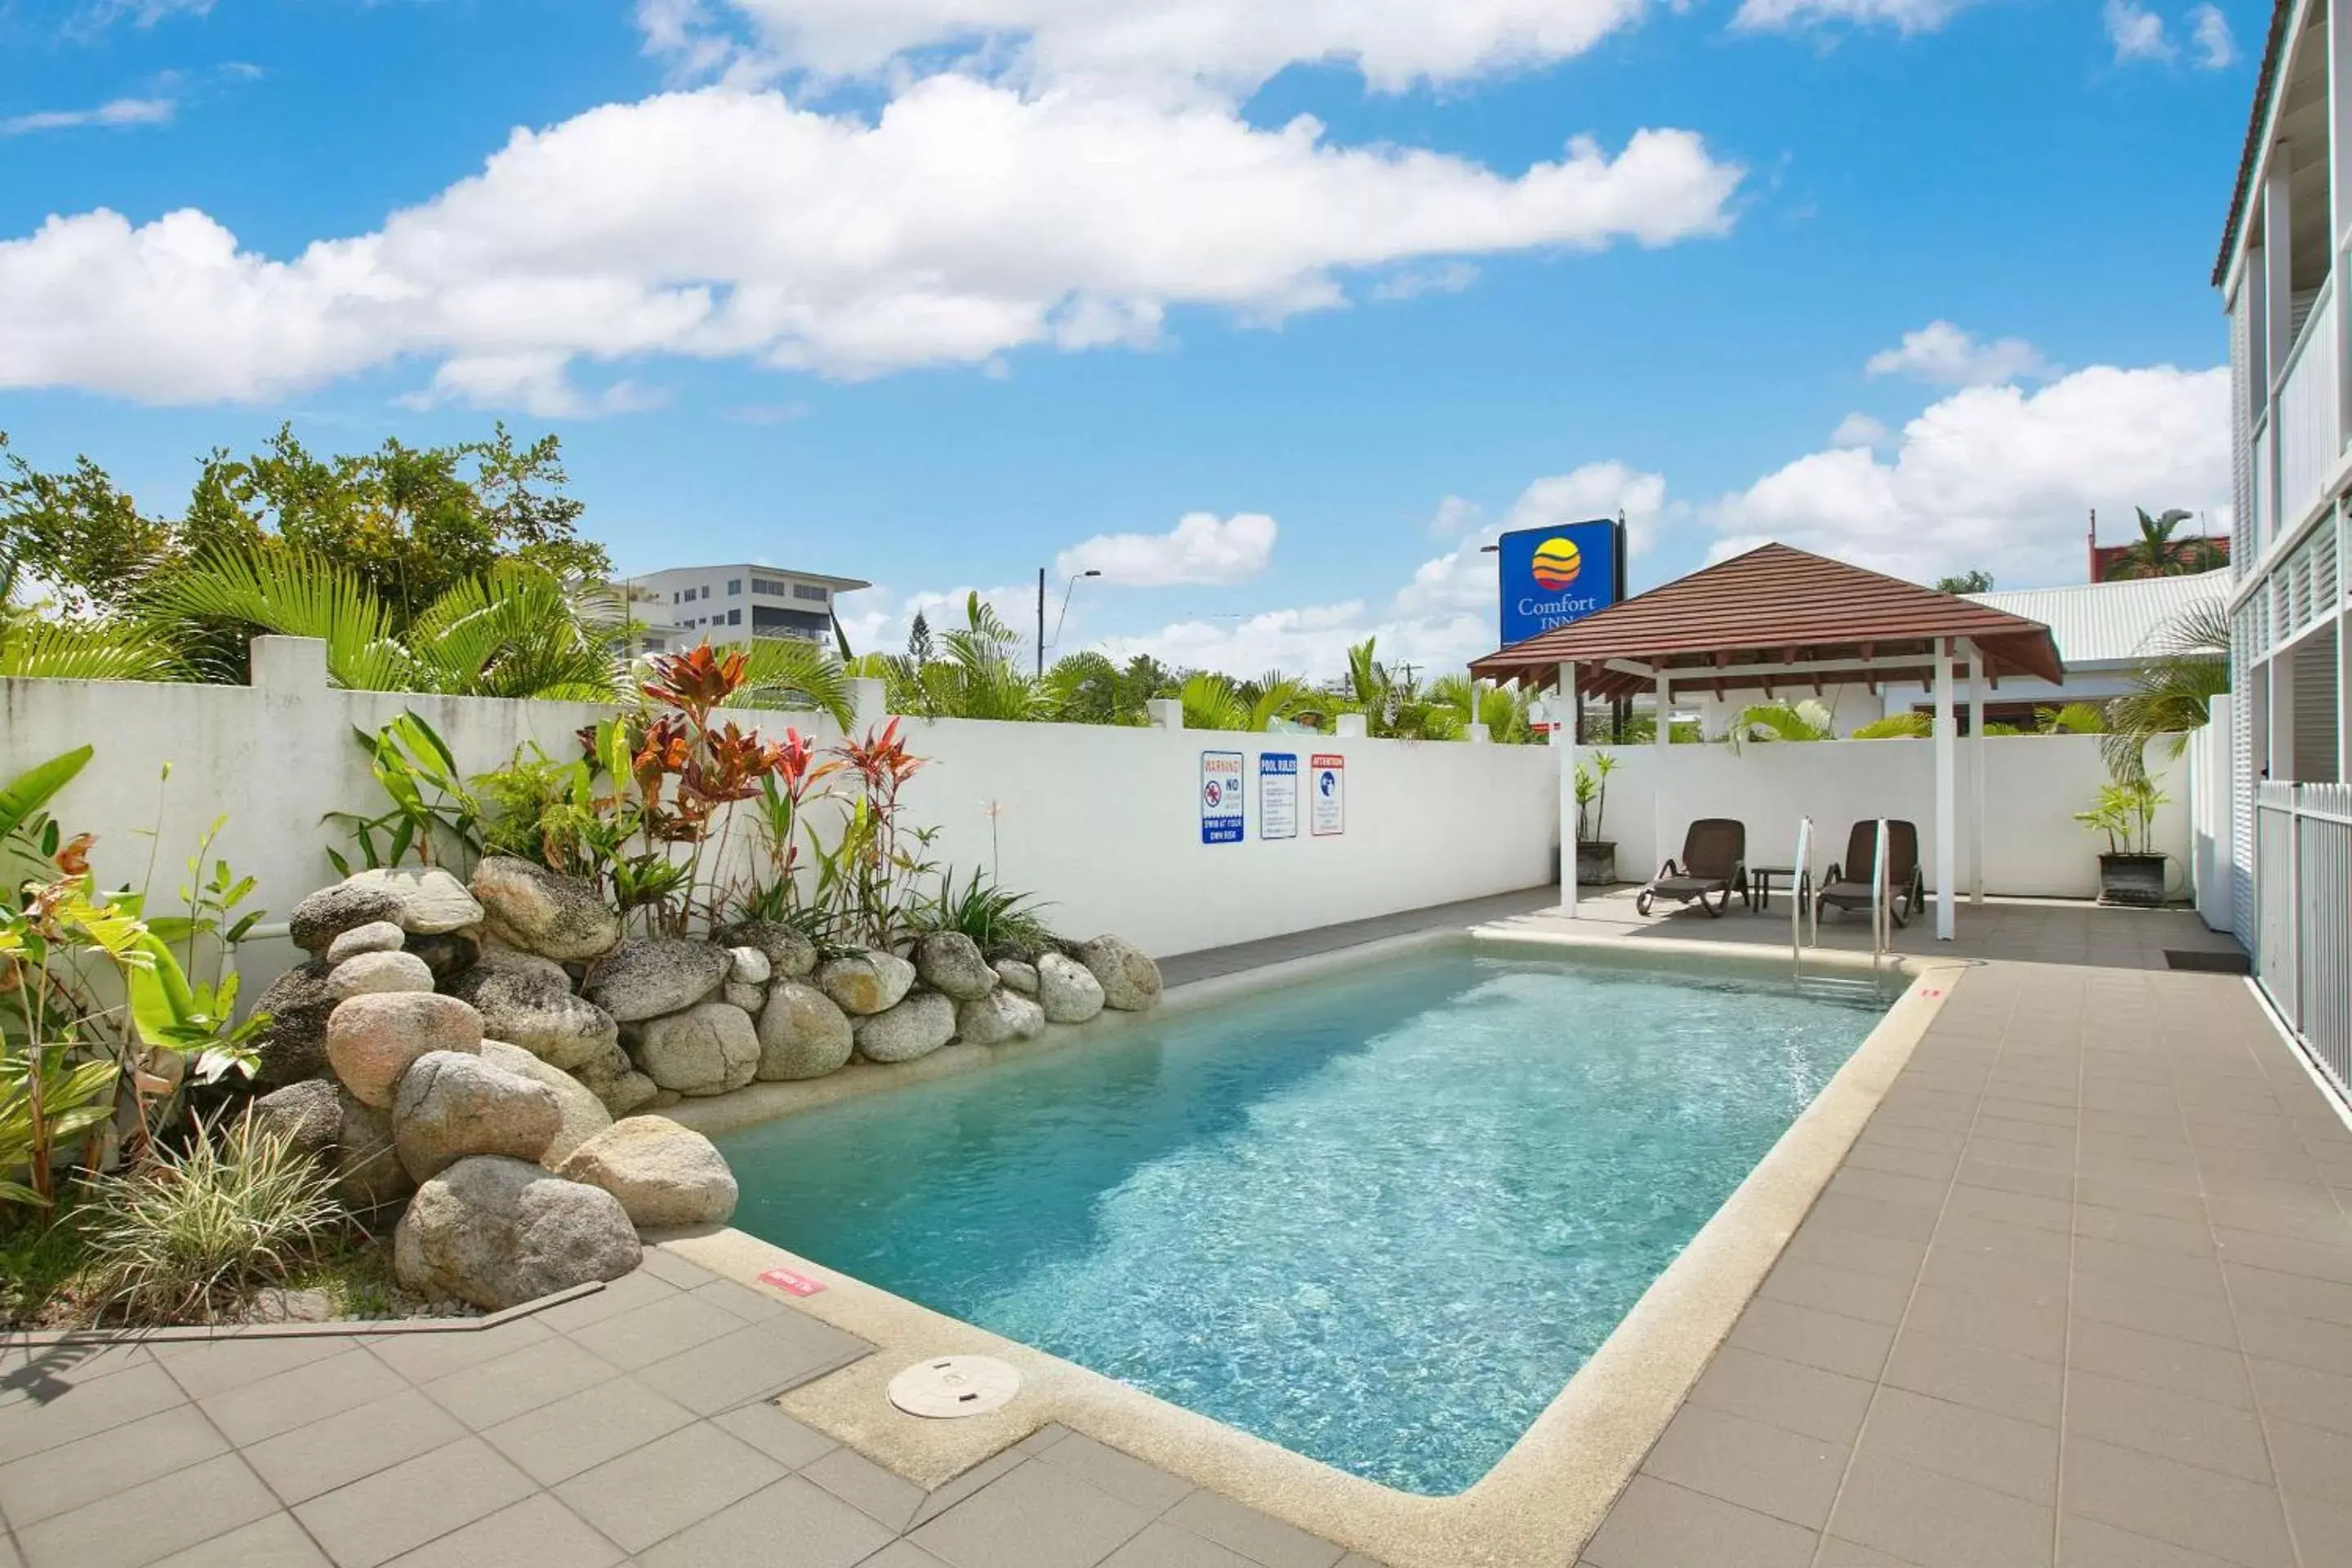 On site, Swimming Pool in Comfort Inn Cairns City